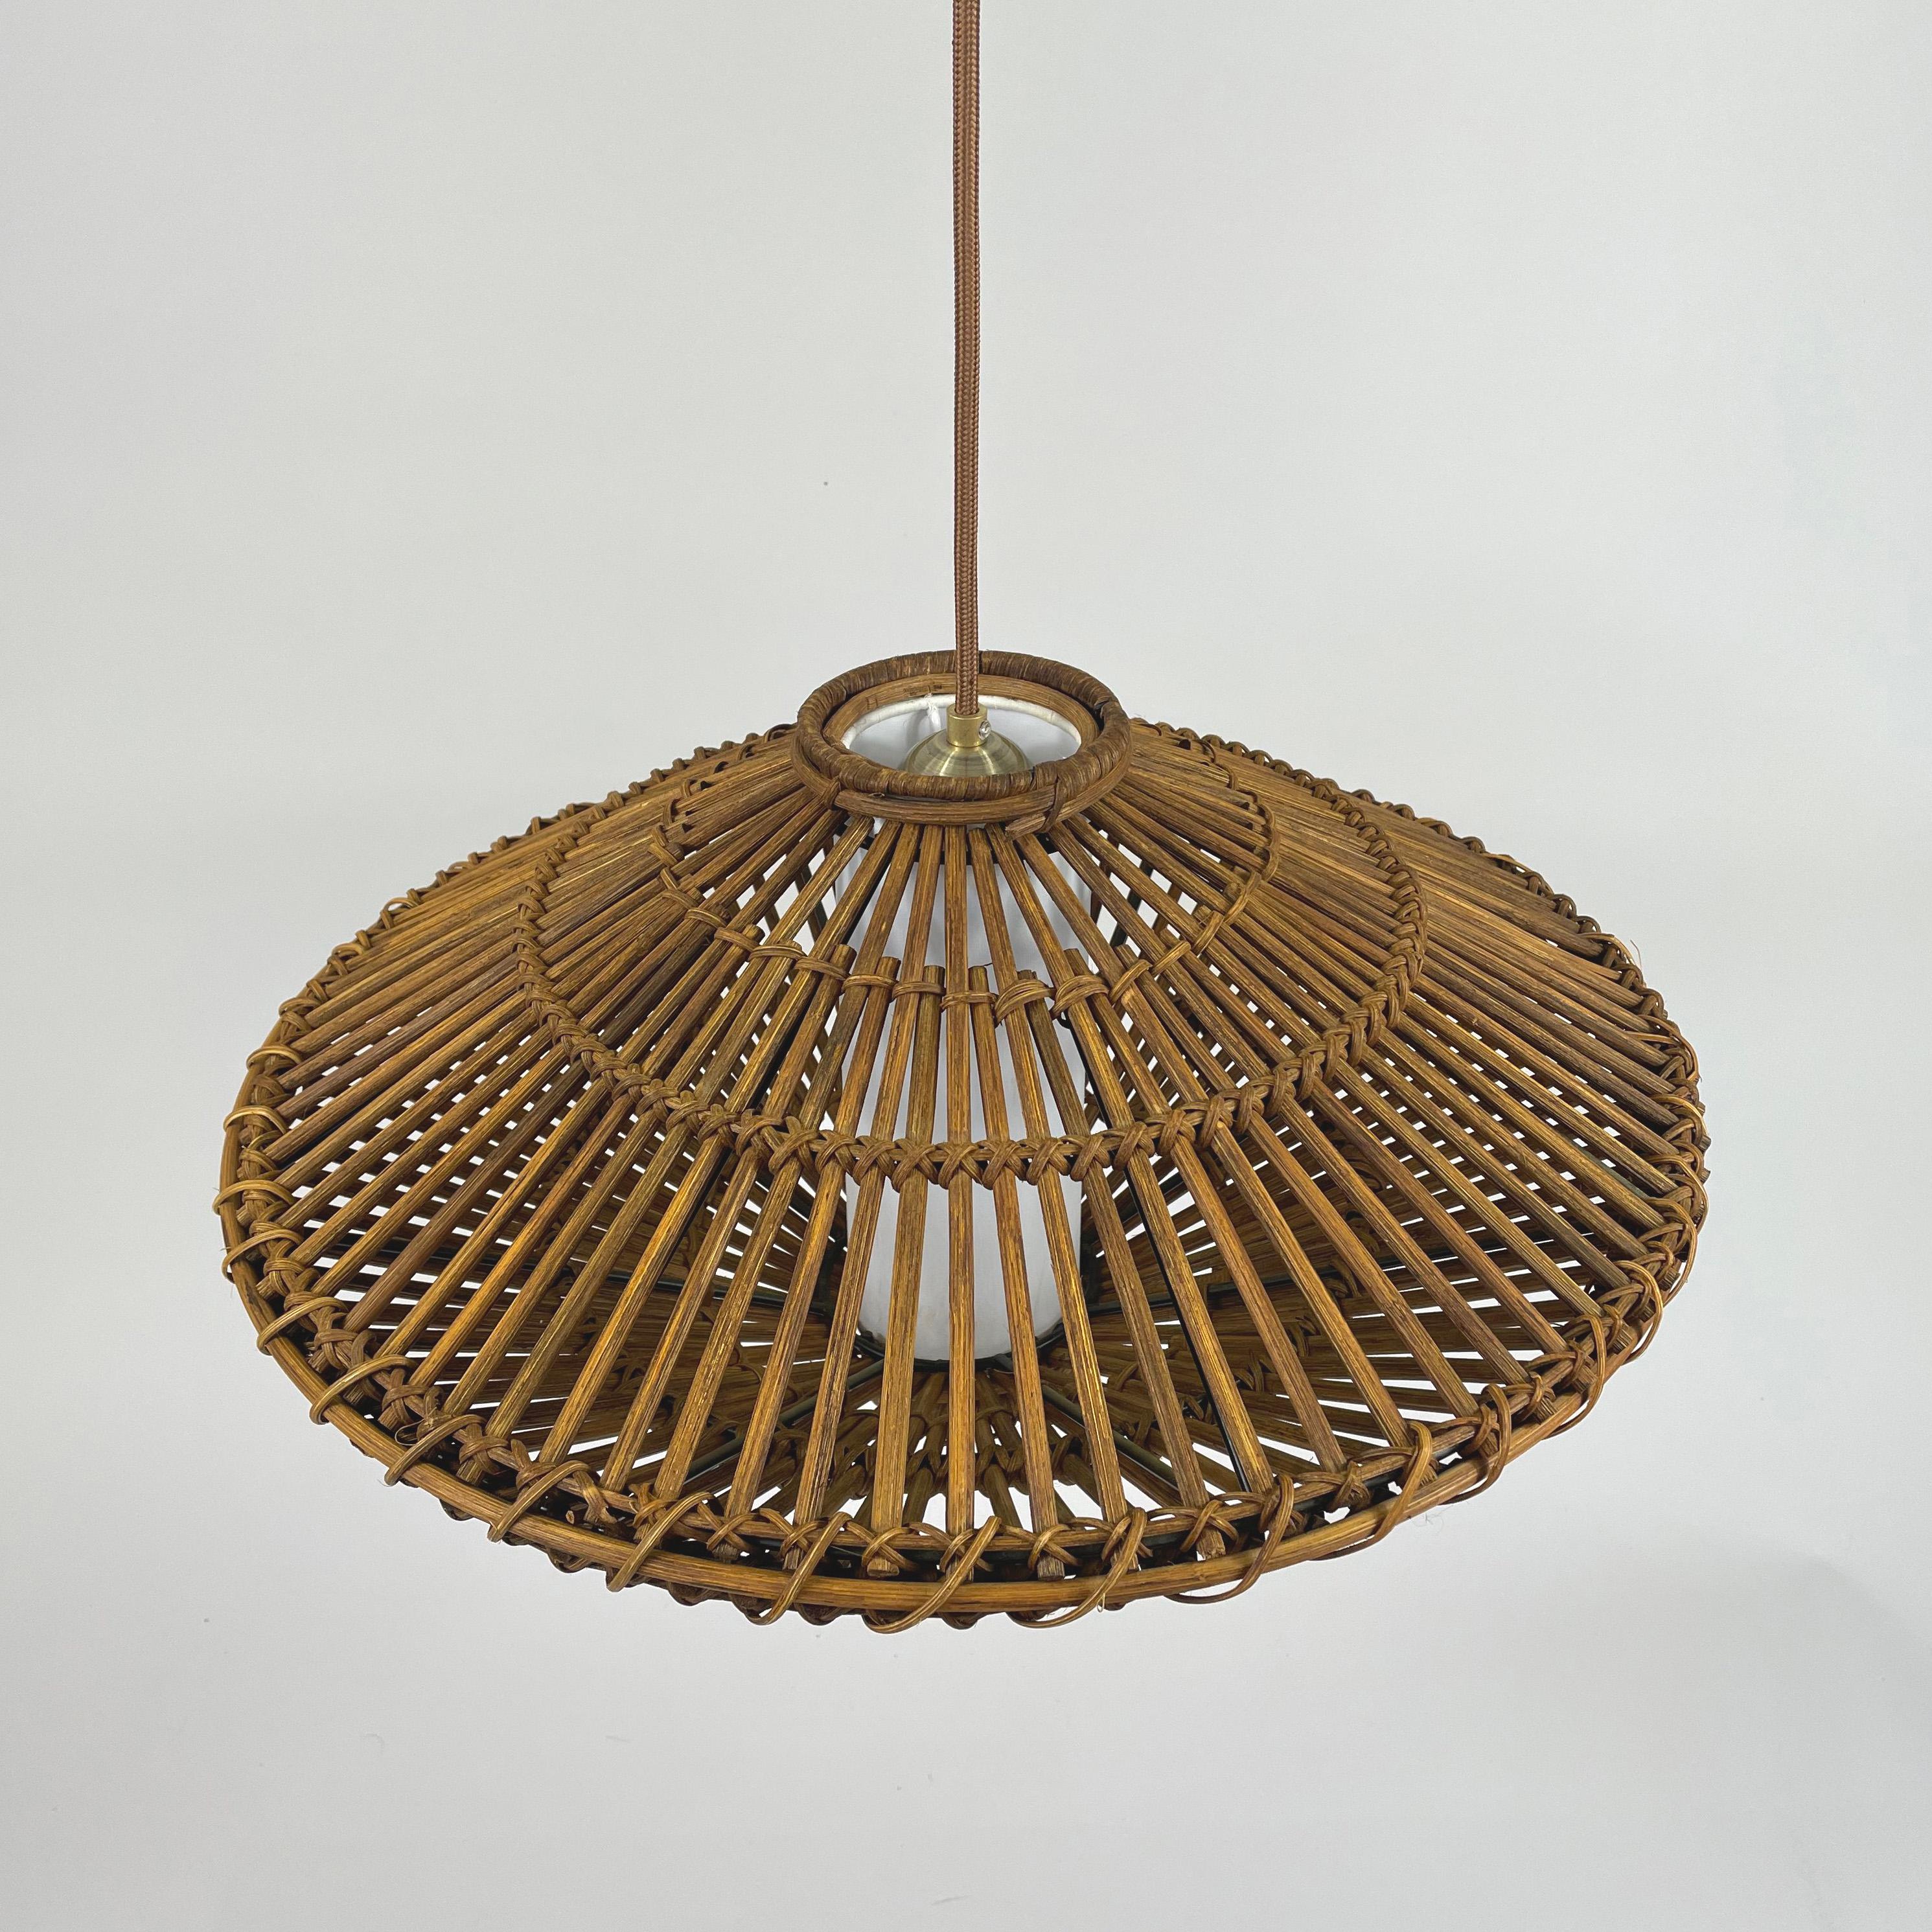 Midcentury French Rattan Wicker Pendant, 1960s For Sale 7